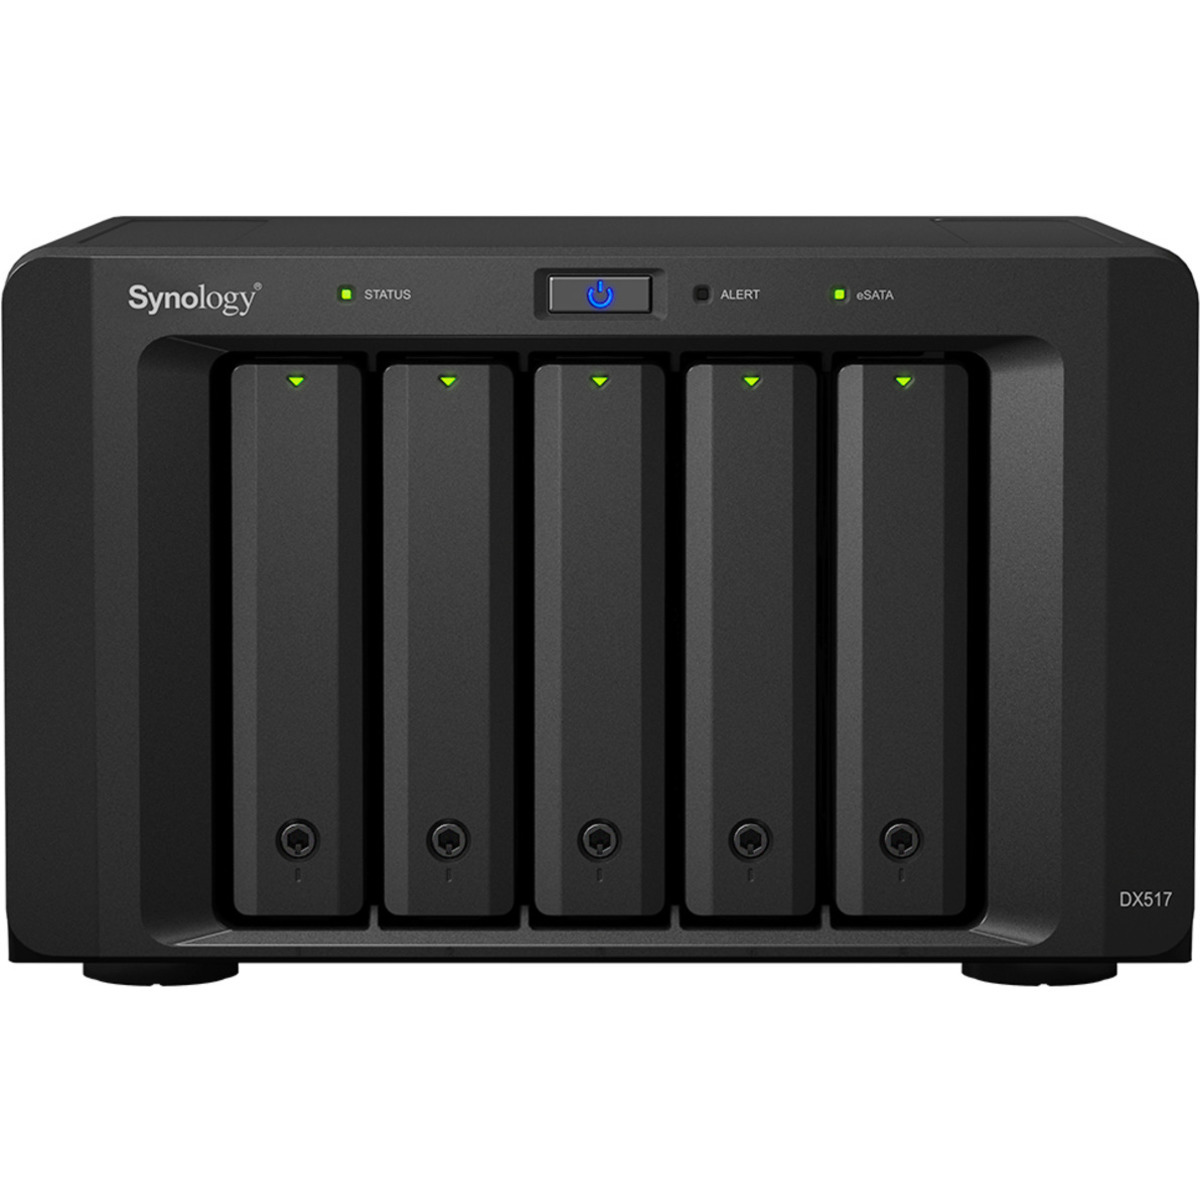 Synology DX517 External Expansion Drive 8tb 5-Bay Desktop Multimedia / Power User / Business Expansion Enclosure 4x2tb Western Digital Gold WD2005FBYZ 3.5 7200rpm SATA 6Gb/s HDD ENTERPRISE Class Drives Installed - Burn-In Tested DX517 External Expansion Drive